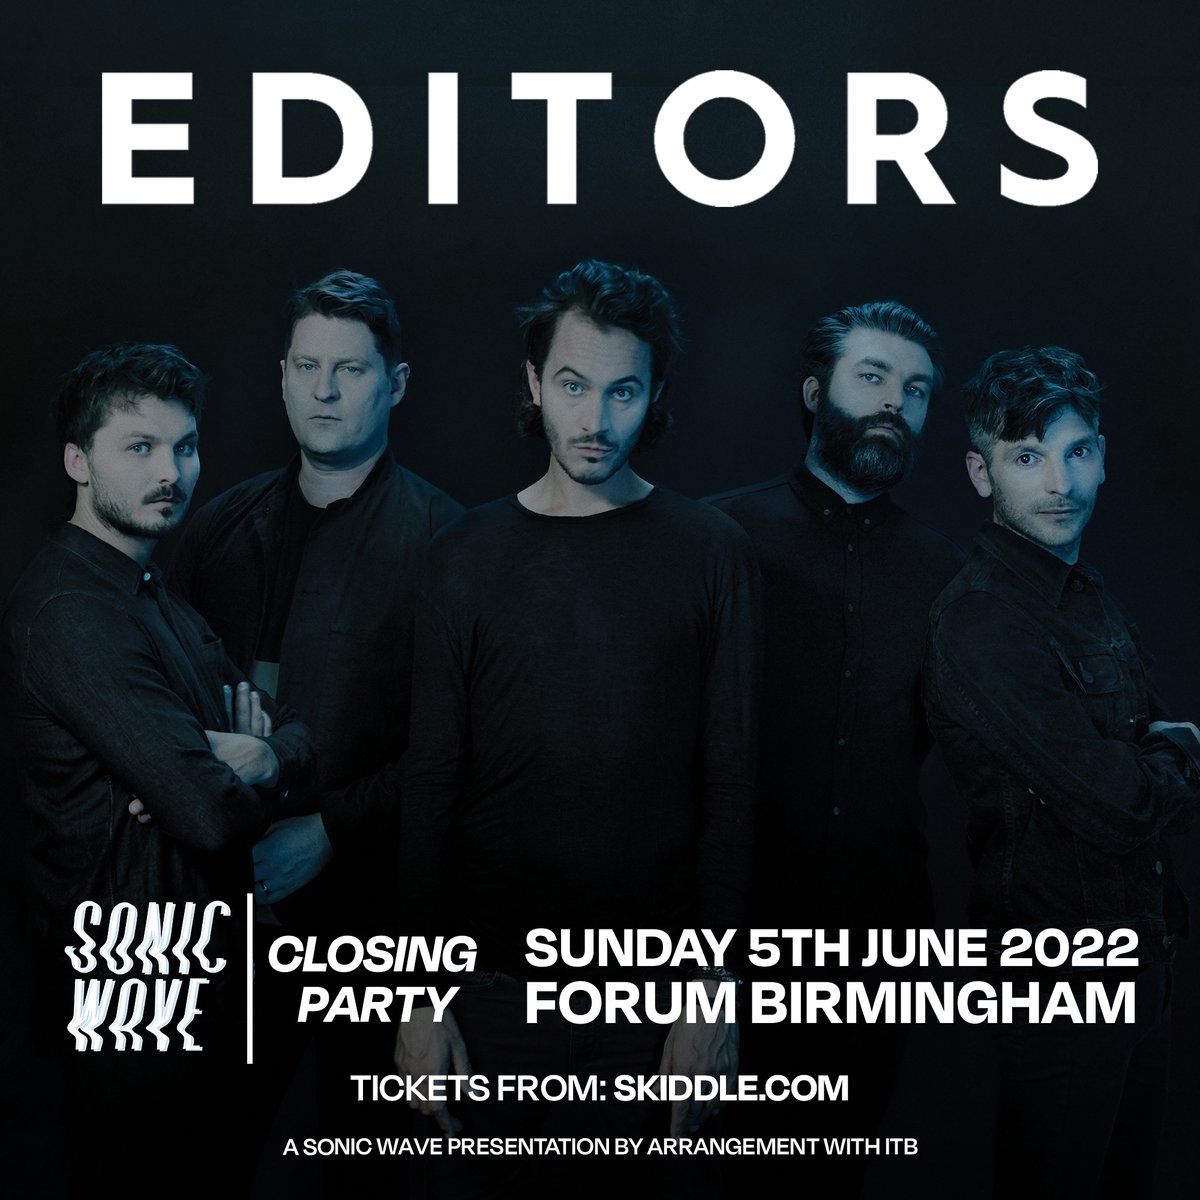 Tickets to our Closing Party with @editorsofficial on 05.06.22 are on sale now! skiddle.com/e/36011625